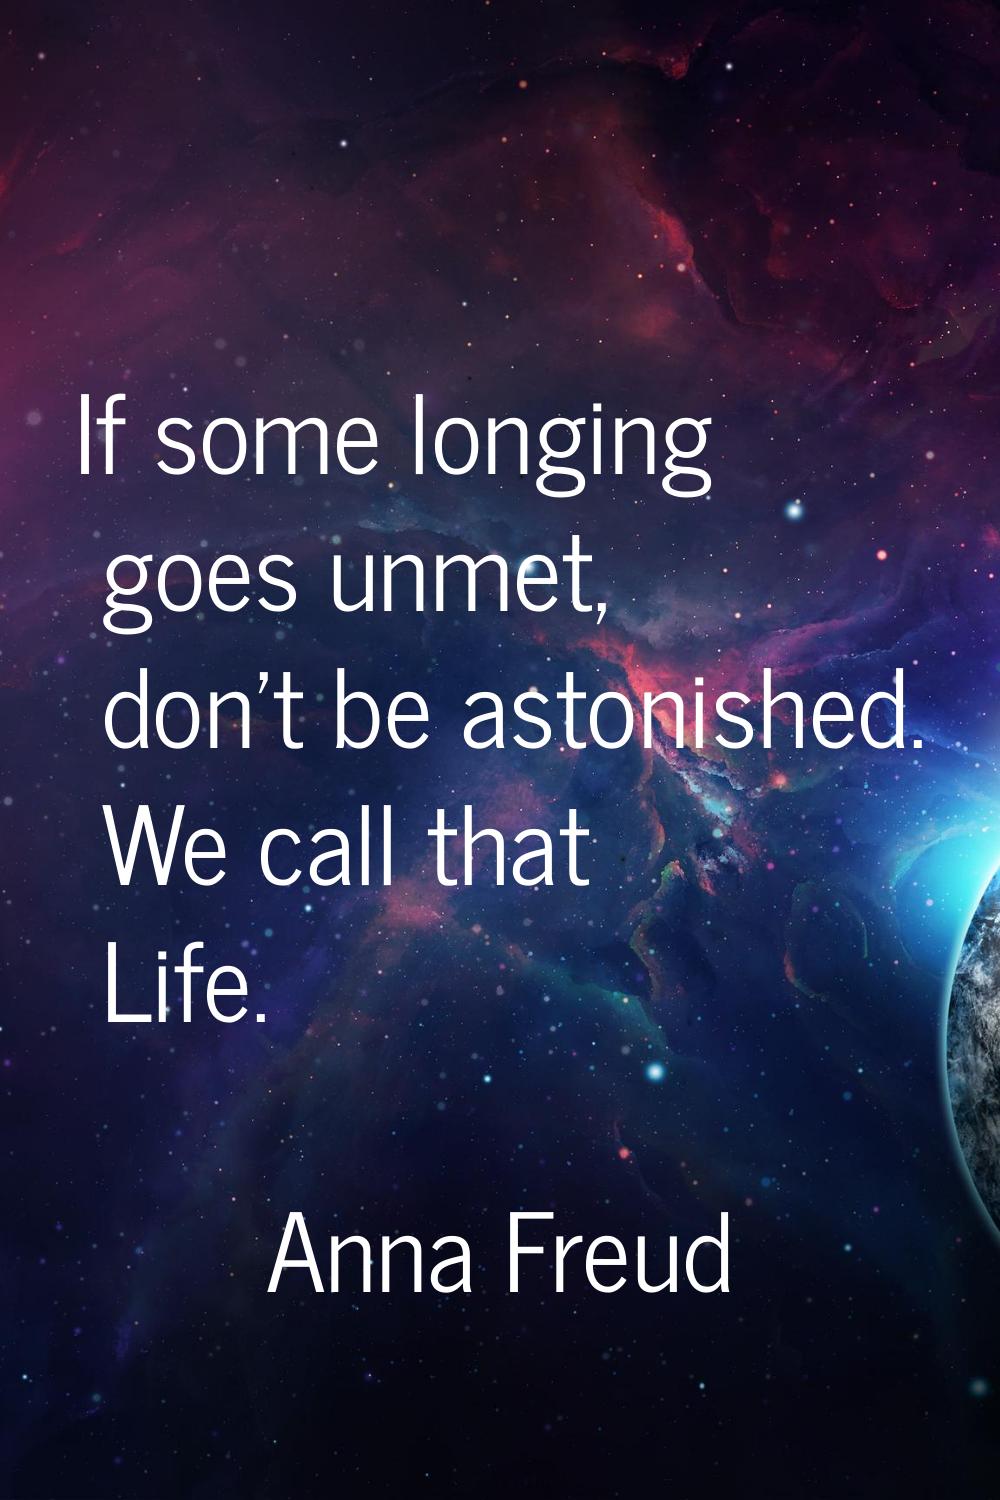 If some longing goes unmet, don't be astonished. We call that Life.